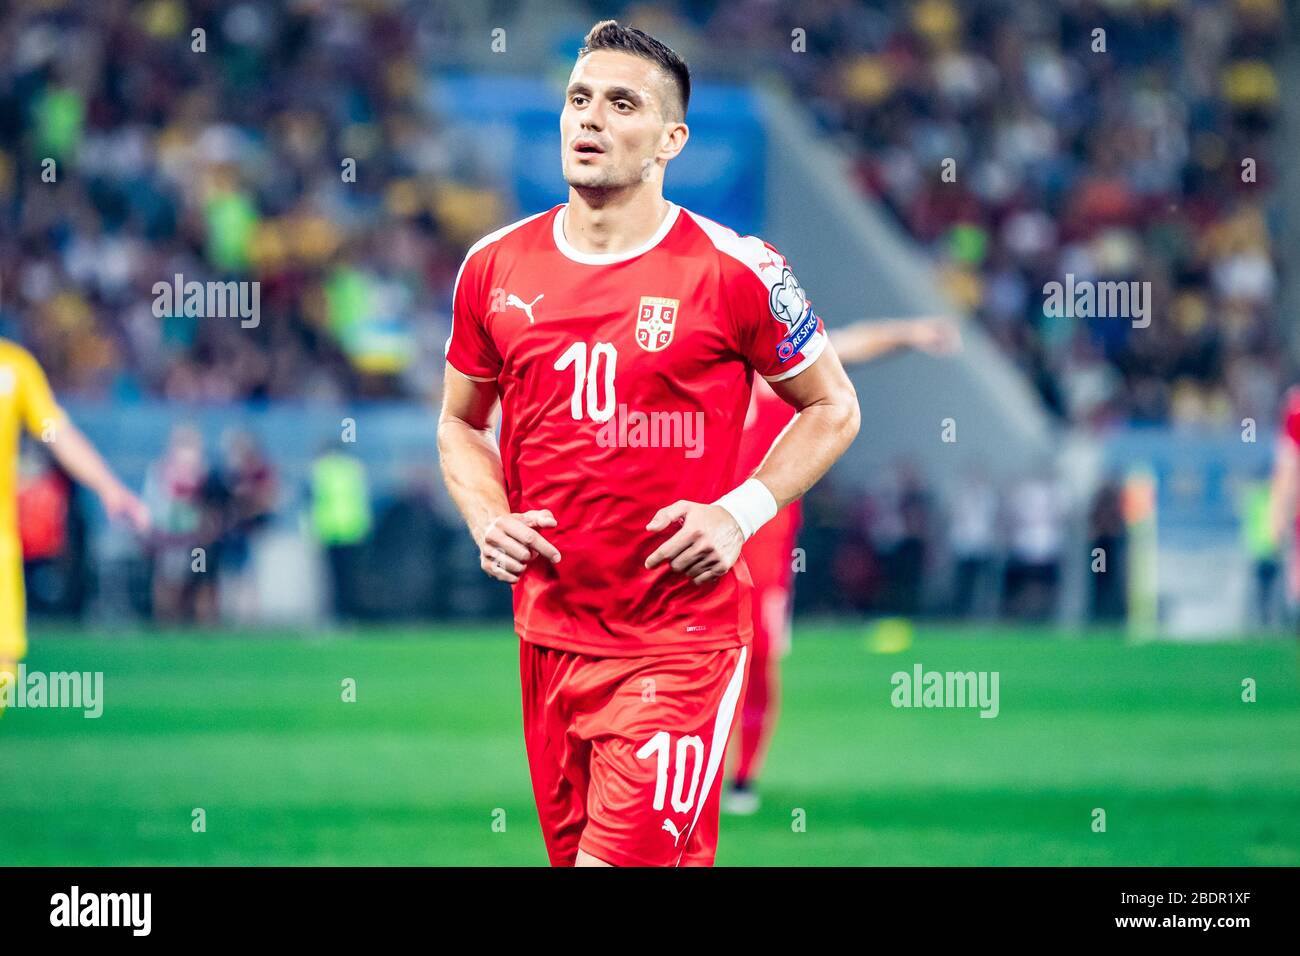 Dusan Tadic of Serbia in action during the UEFA EURO 2020 Qualifiers (Group B) match between Ukraine and Serbia at Arena Lviv. (Final Score: Ukraine 5:0 Serbia) Stock Photo